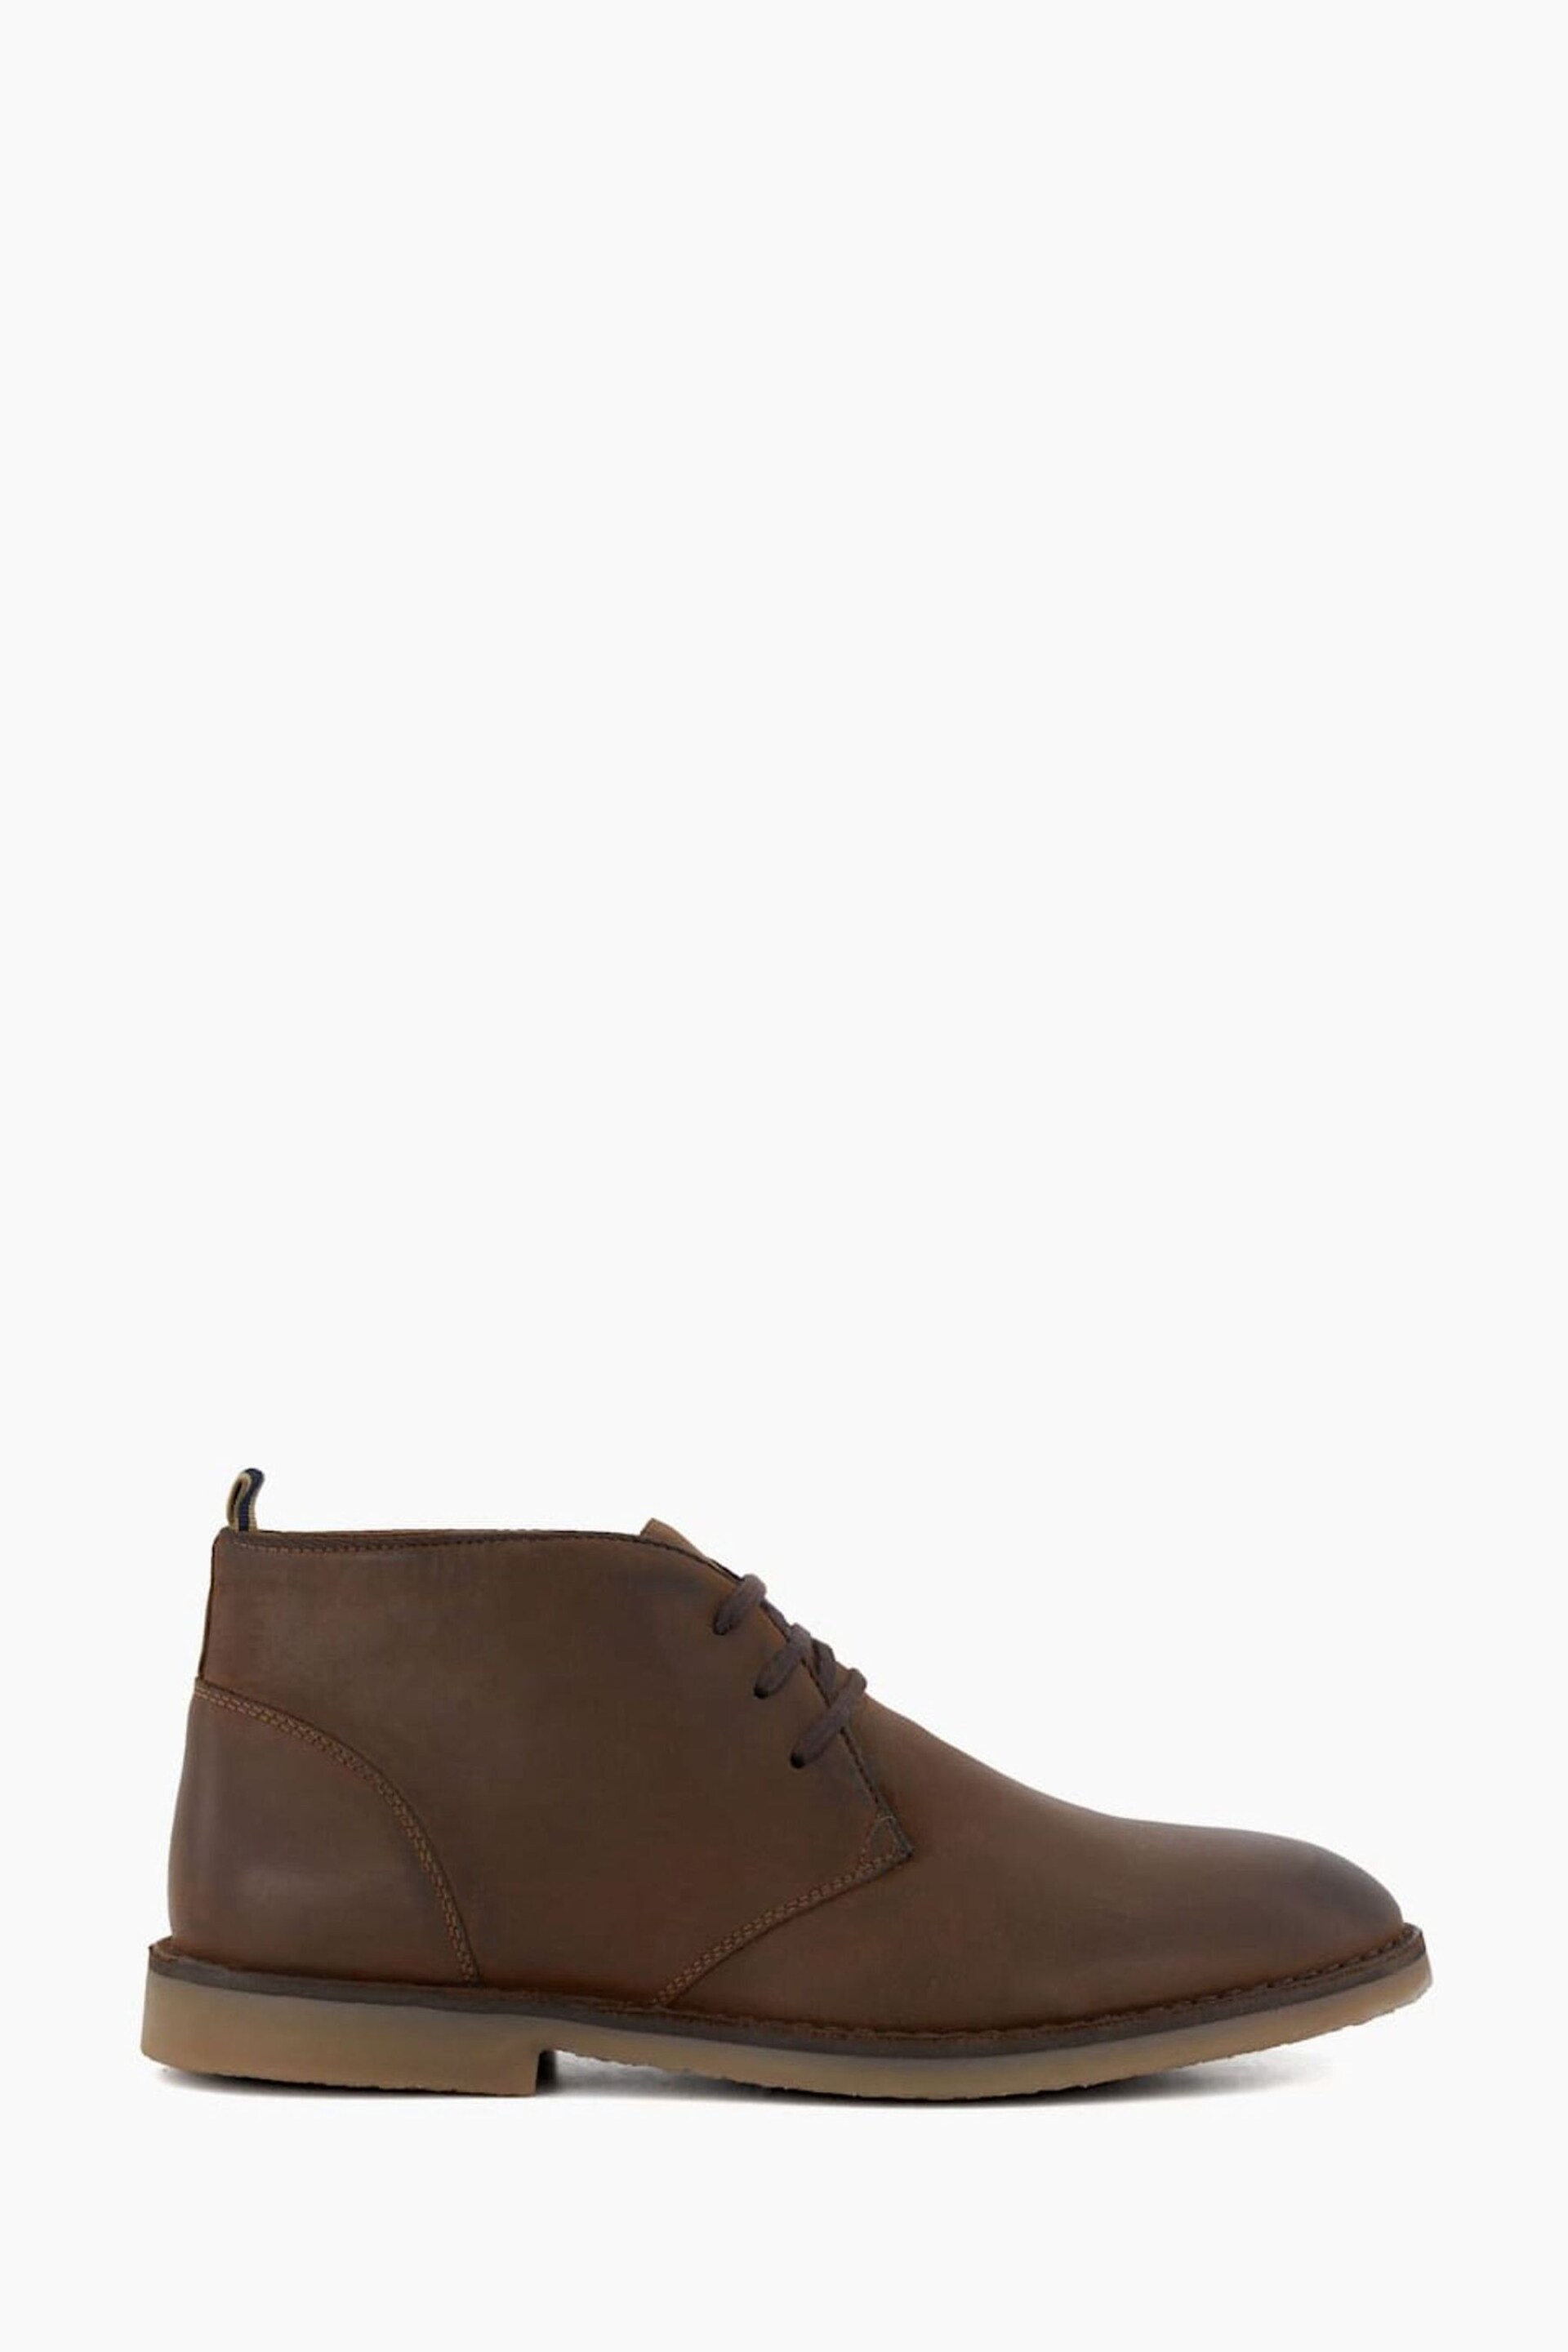 Dune London Brown Cashed Chukka Boots - Image 1 of 6